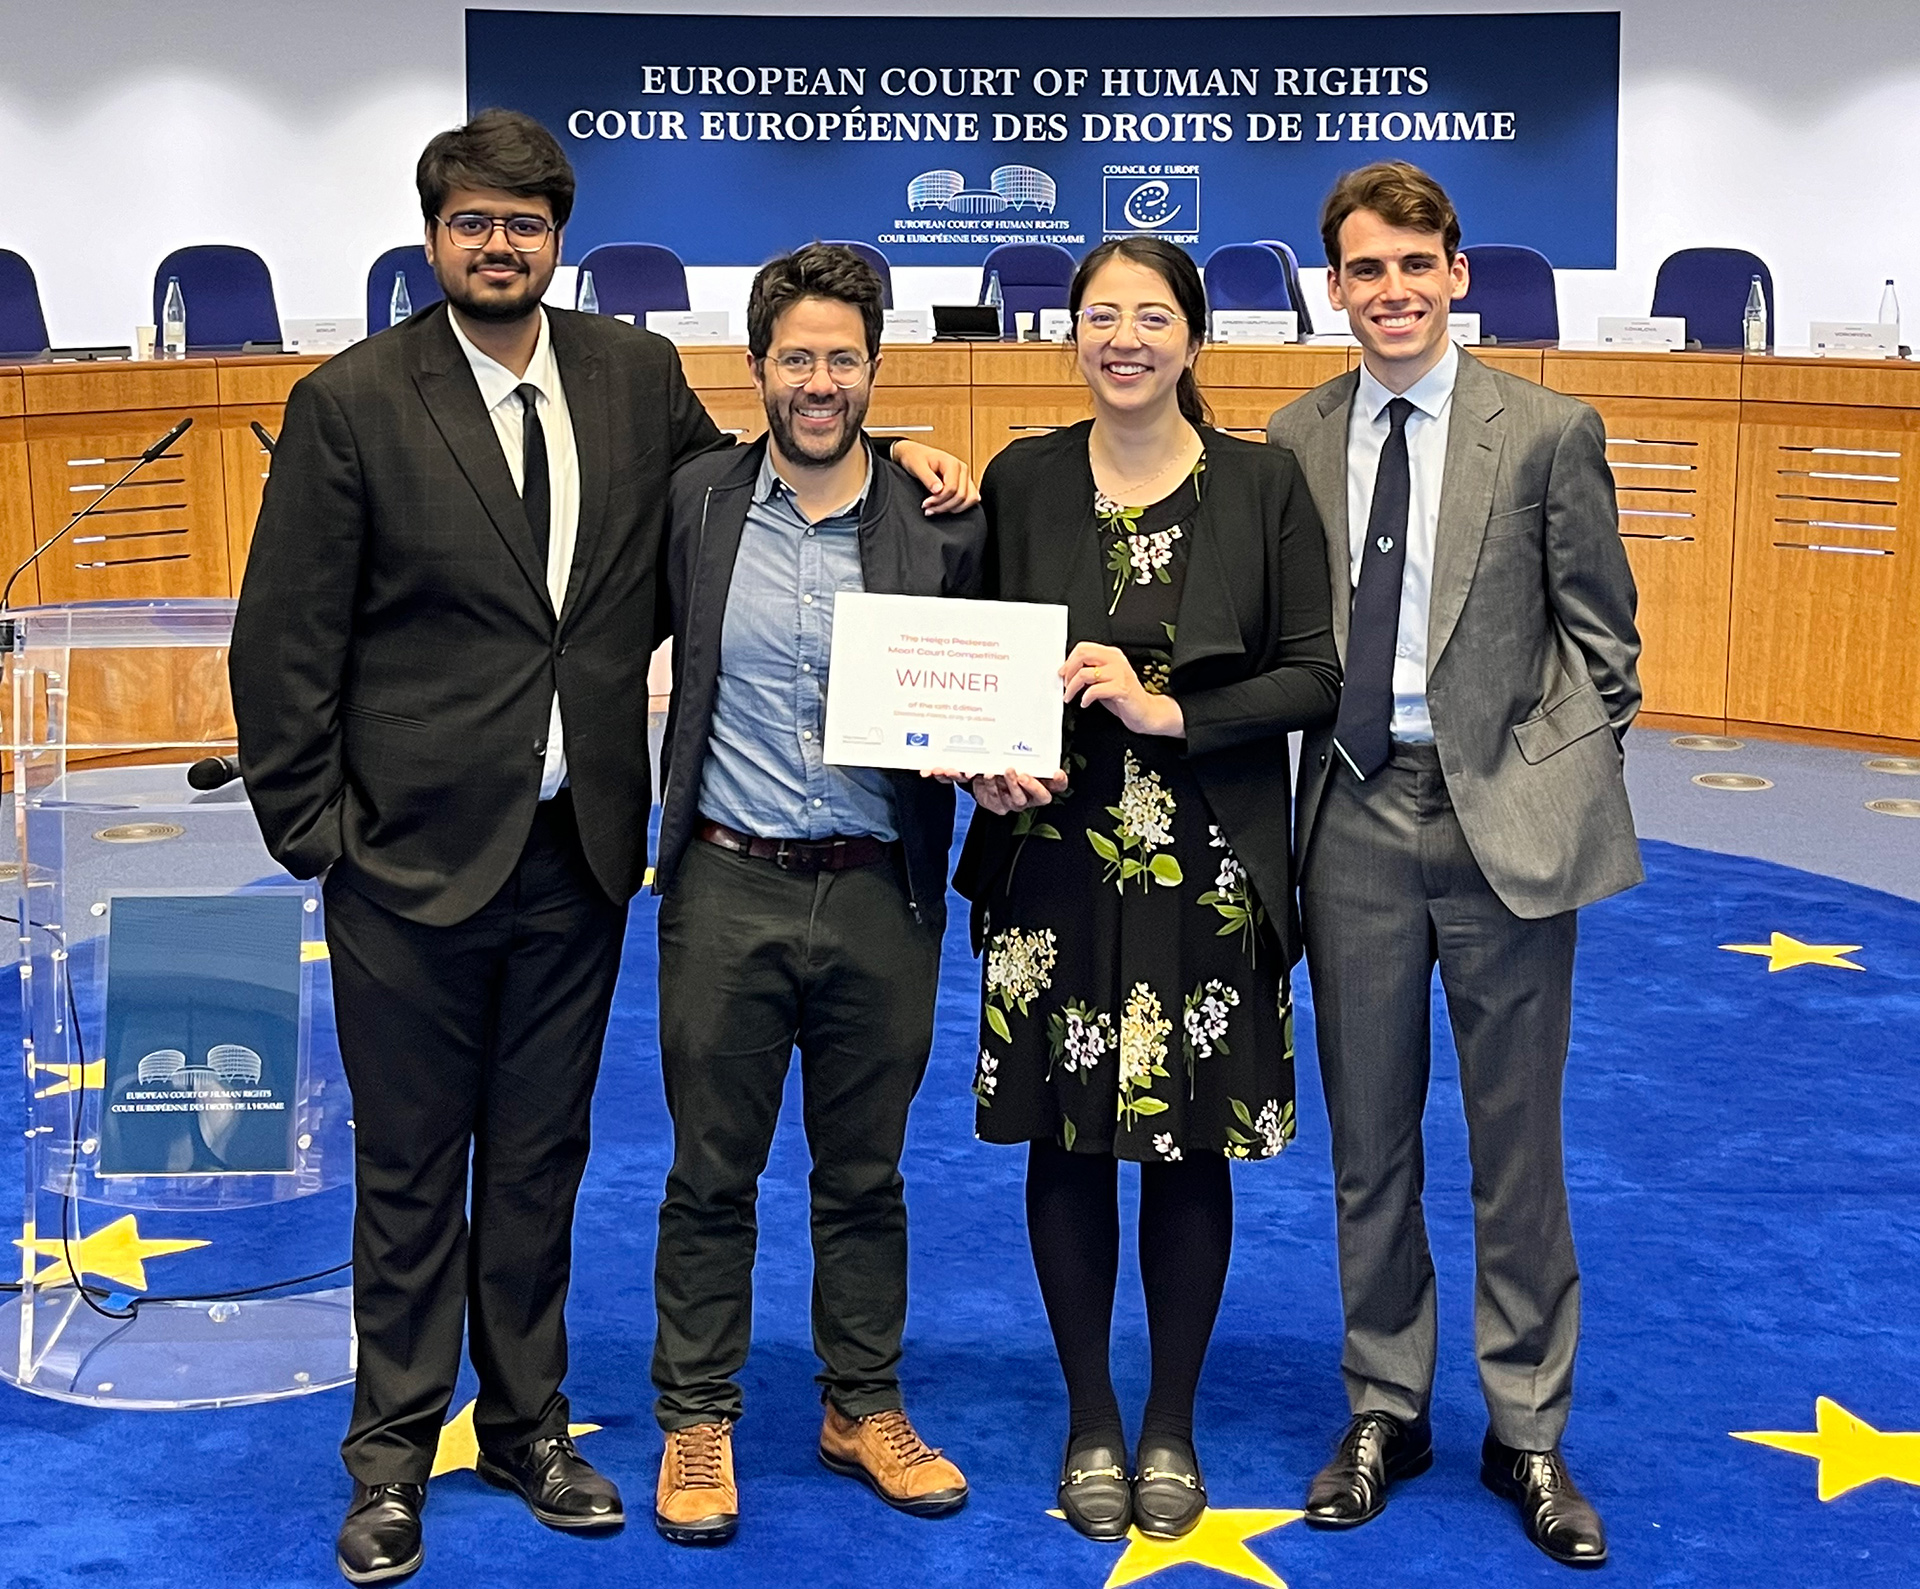 Four students stand with a winner certificate in the European Court of Human Rights